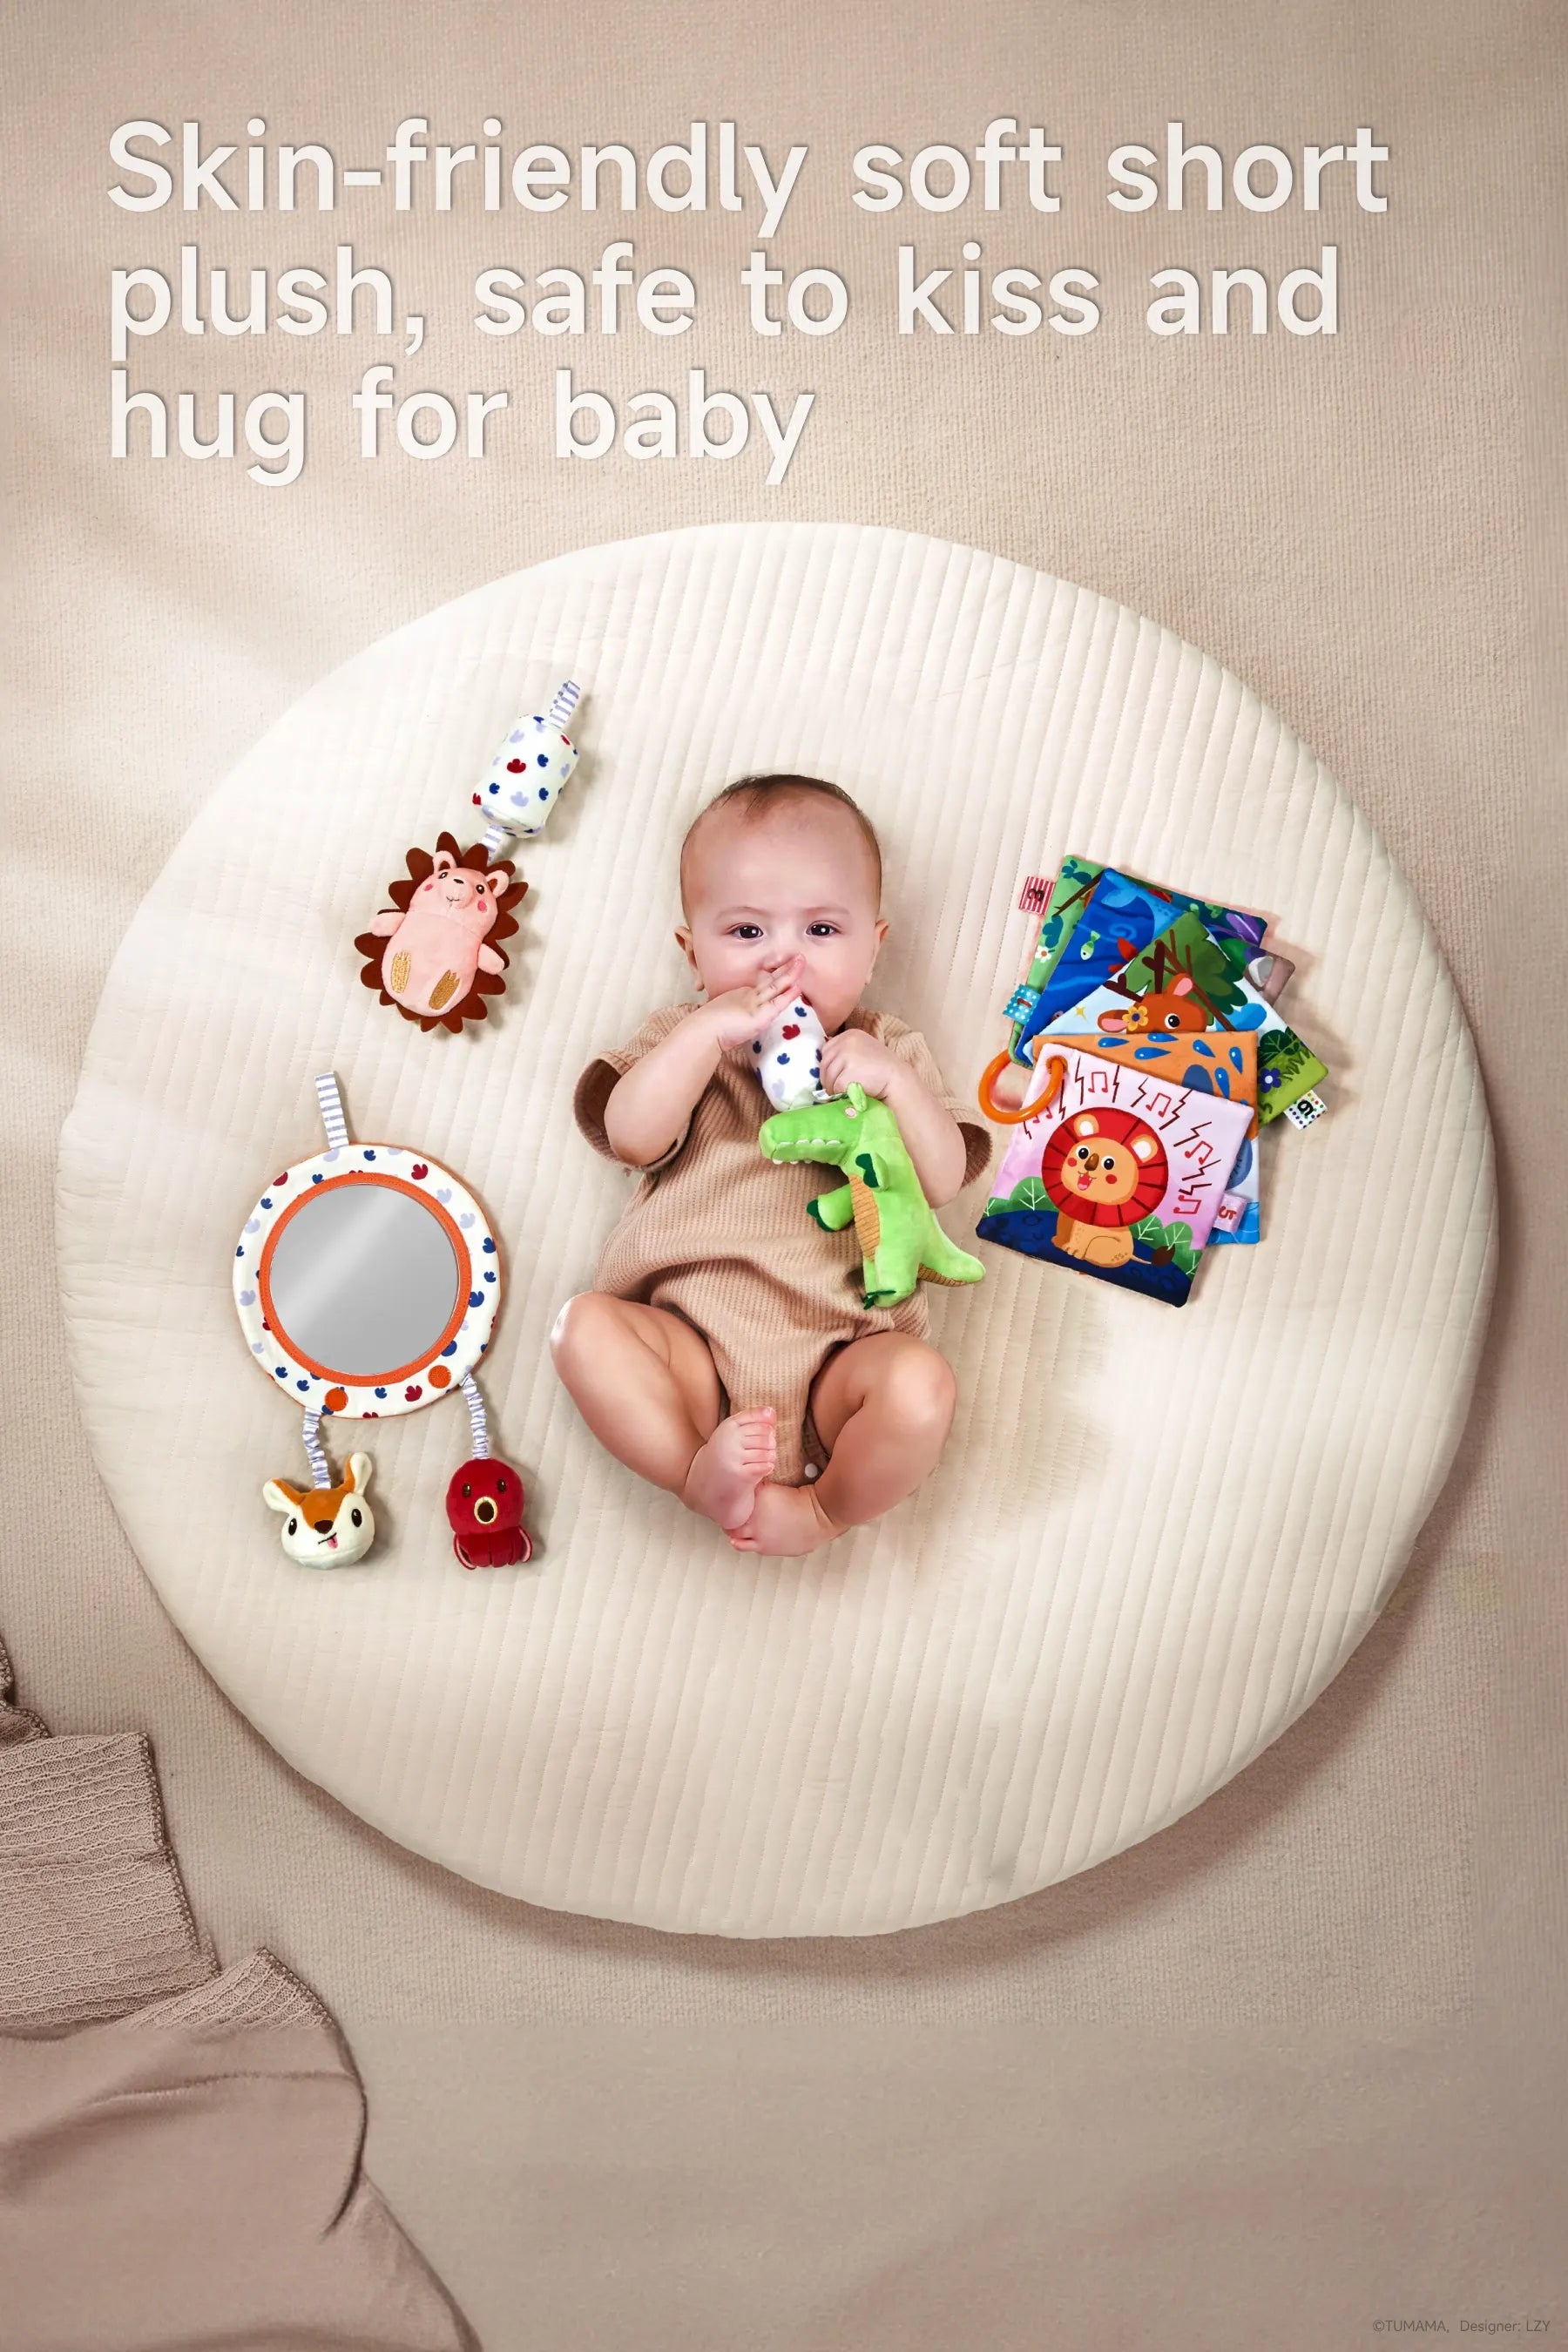 Baby_s tummy time mirror plush rattle book for sensory experiences